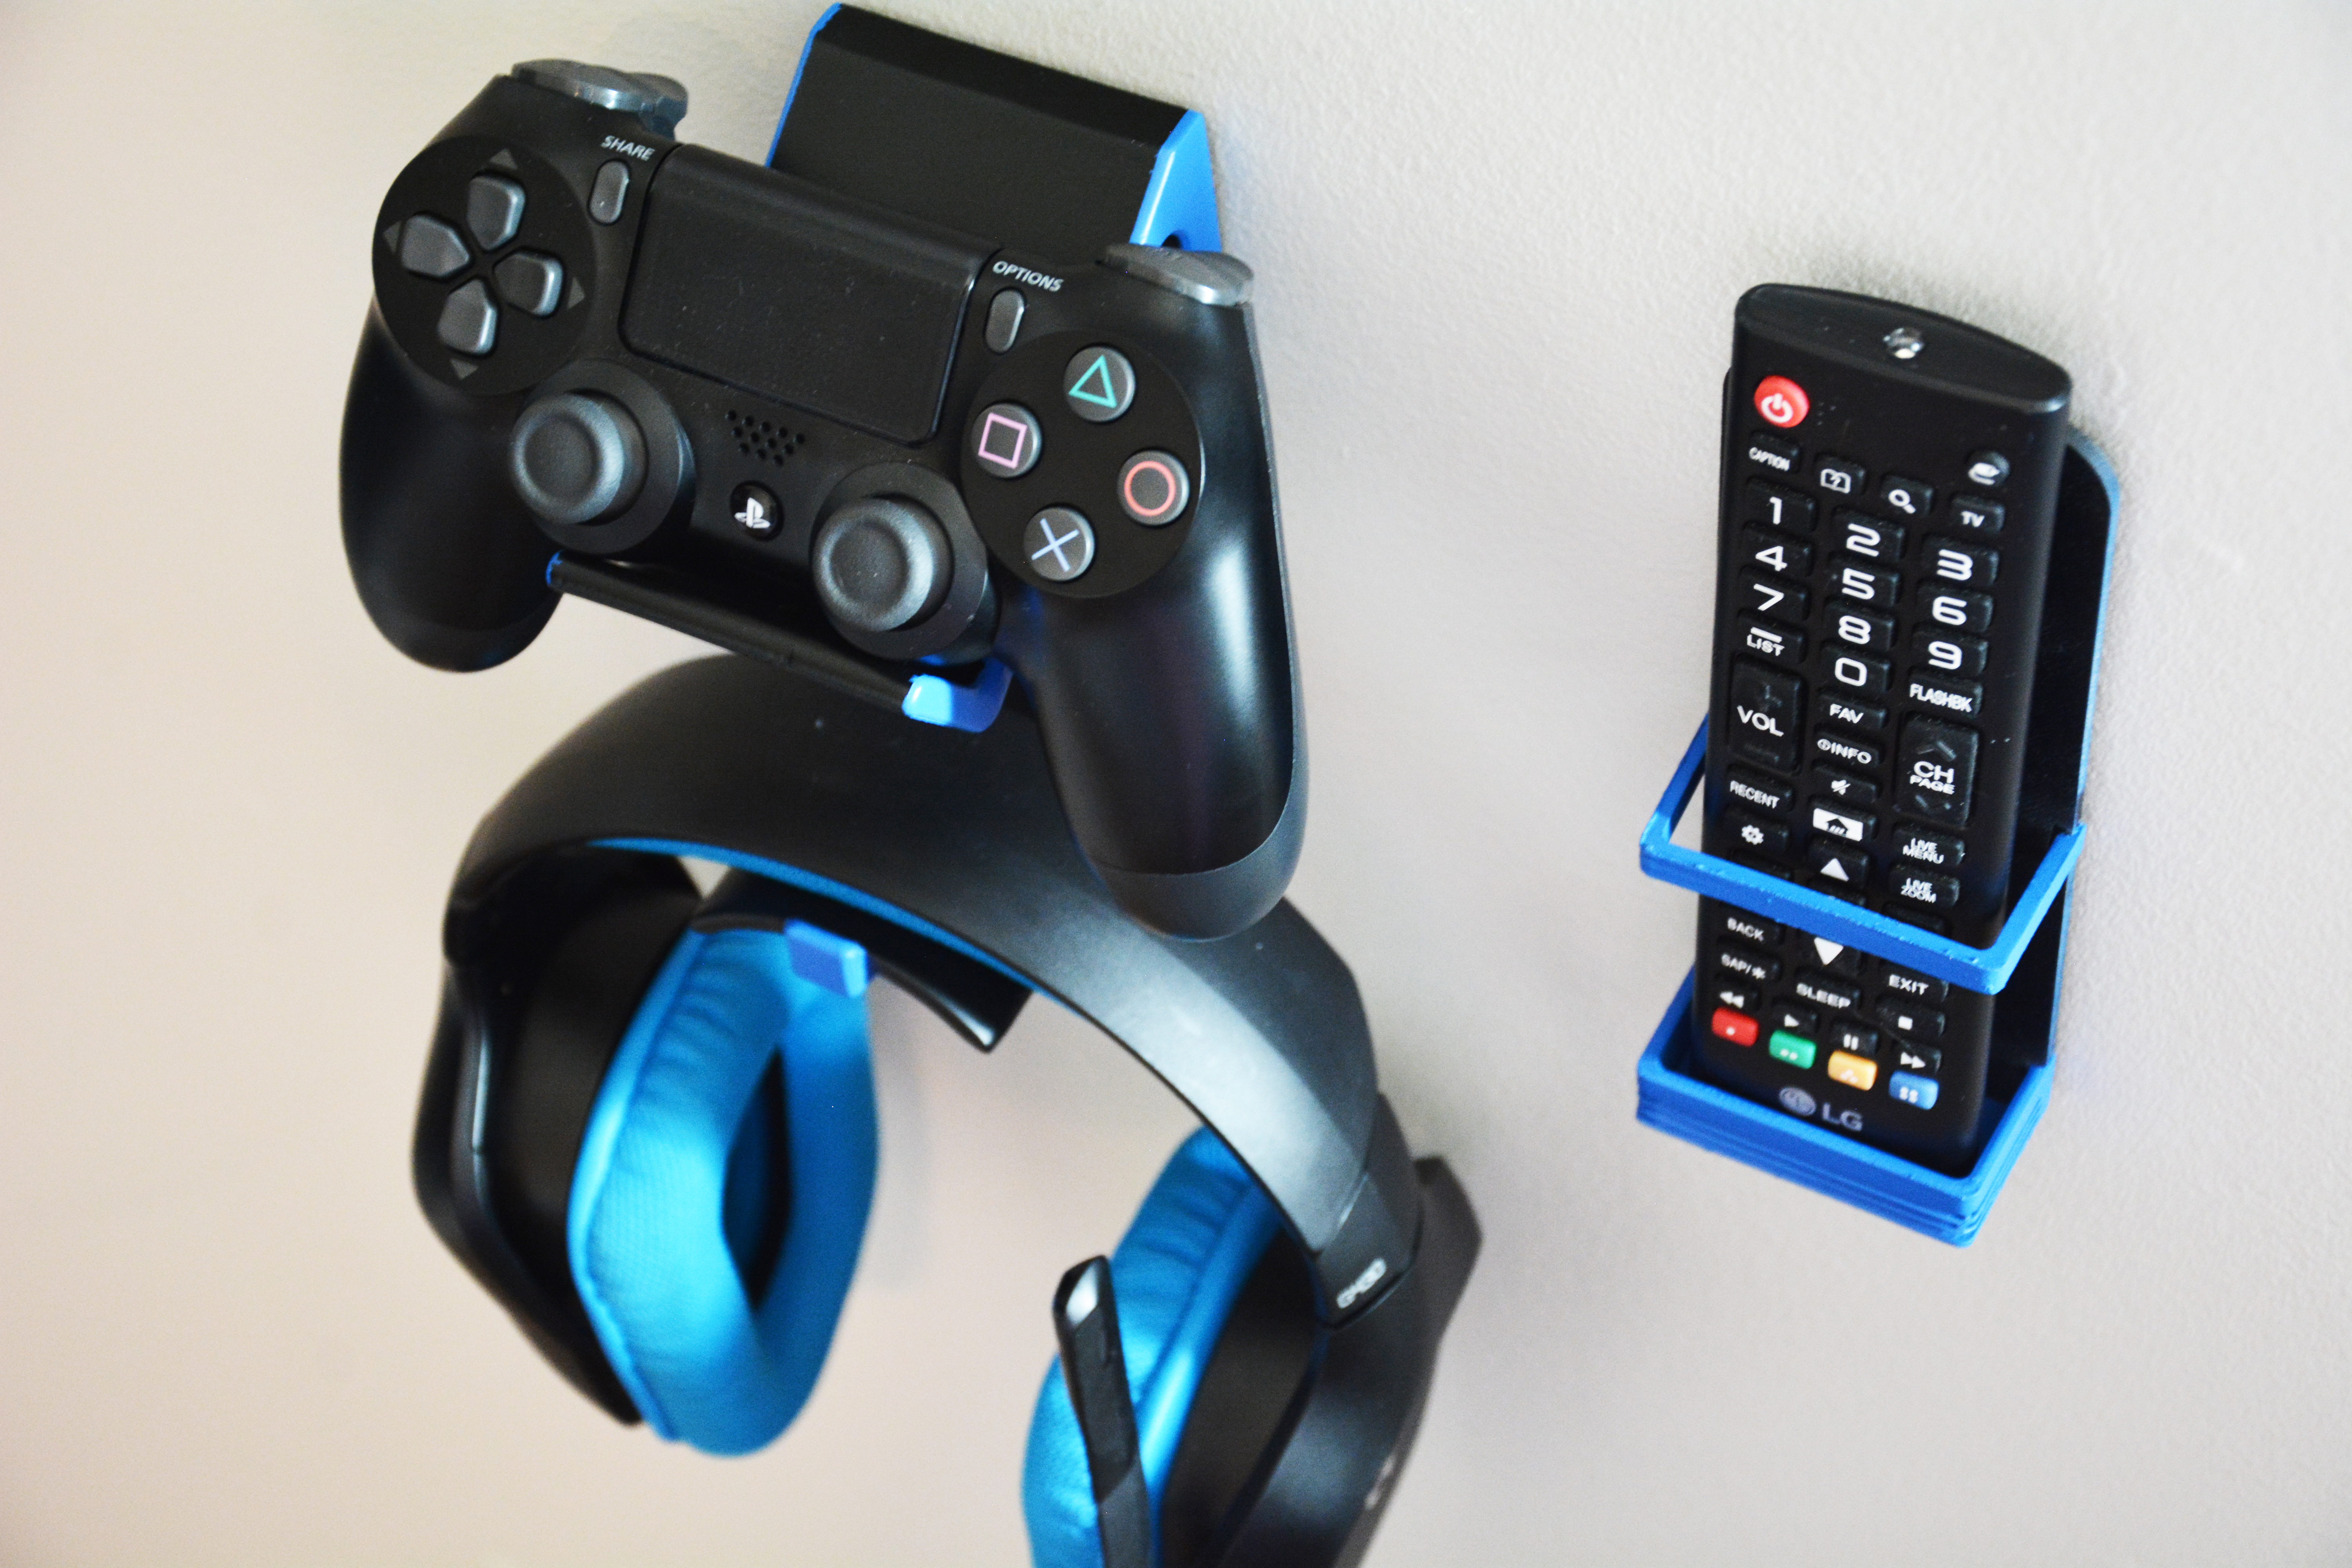 3d printed ps4 controller stand